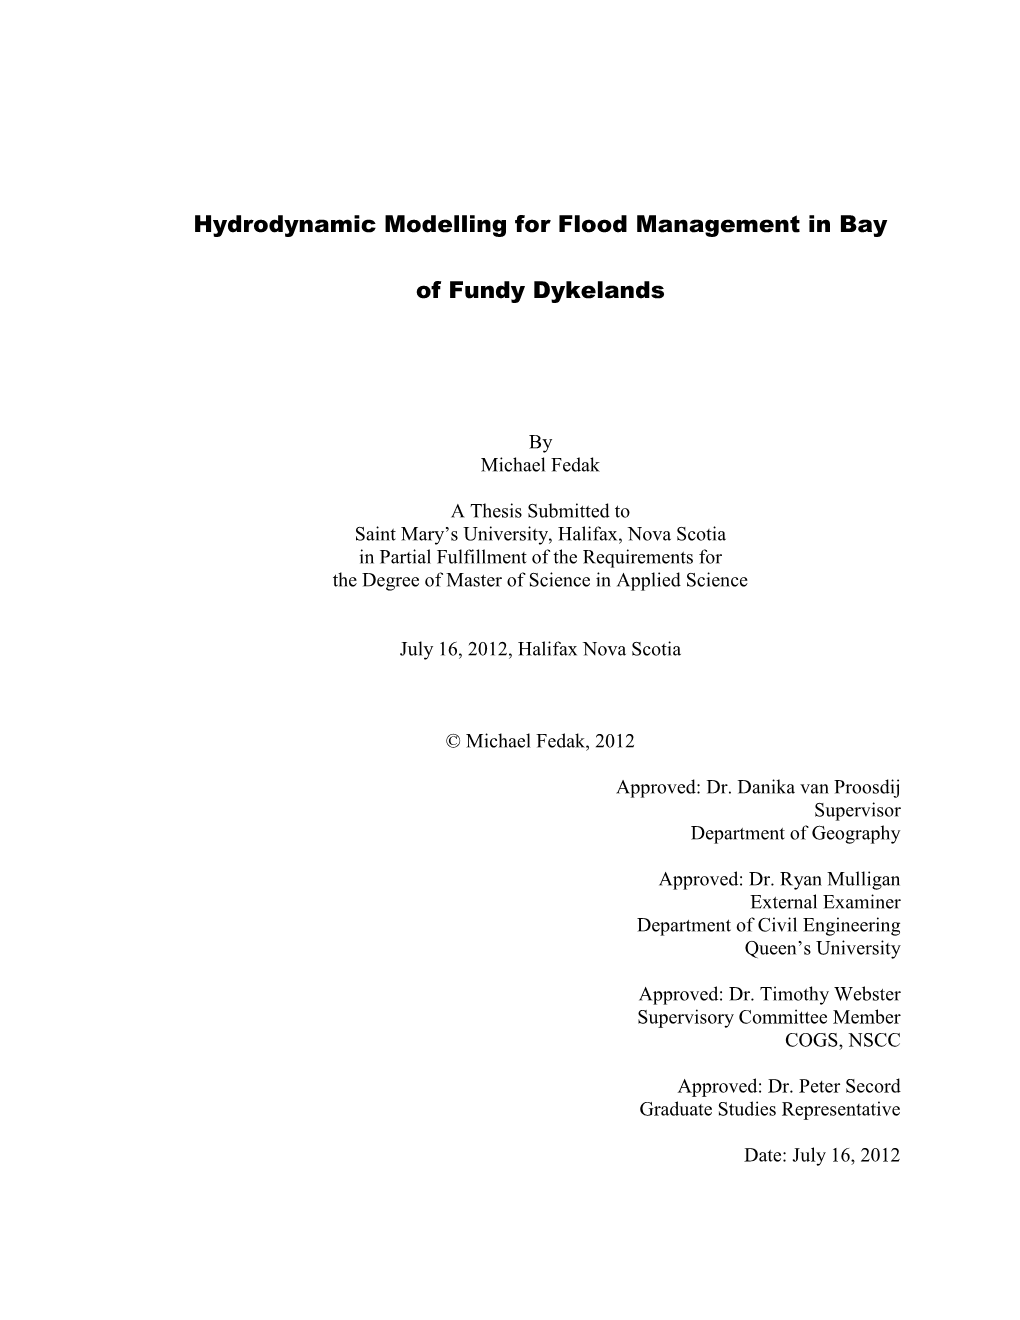 Hydrodynamic Modelling for Flood Management in Bay of Fundy Dykelands”